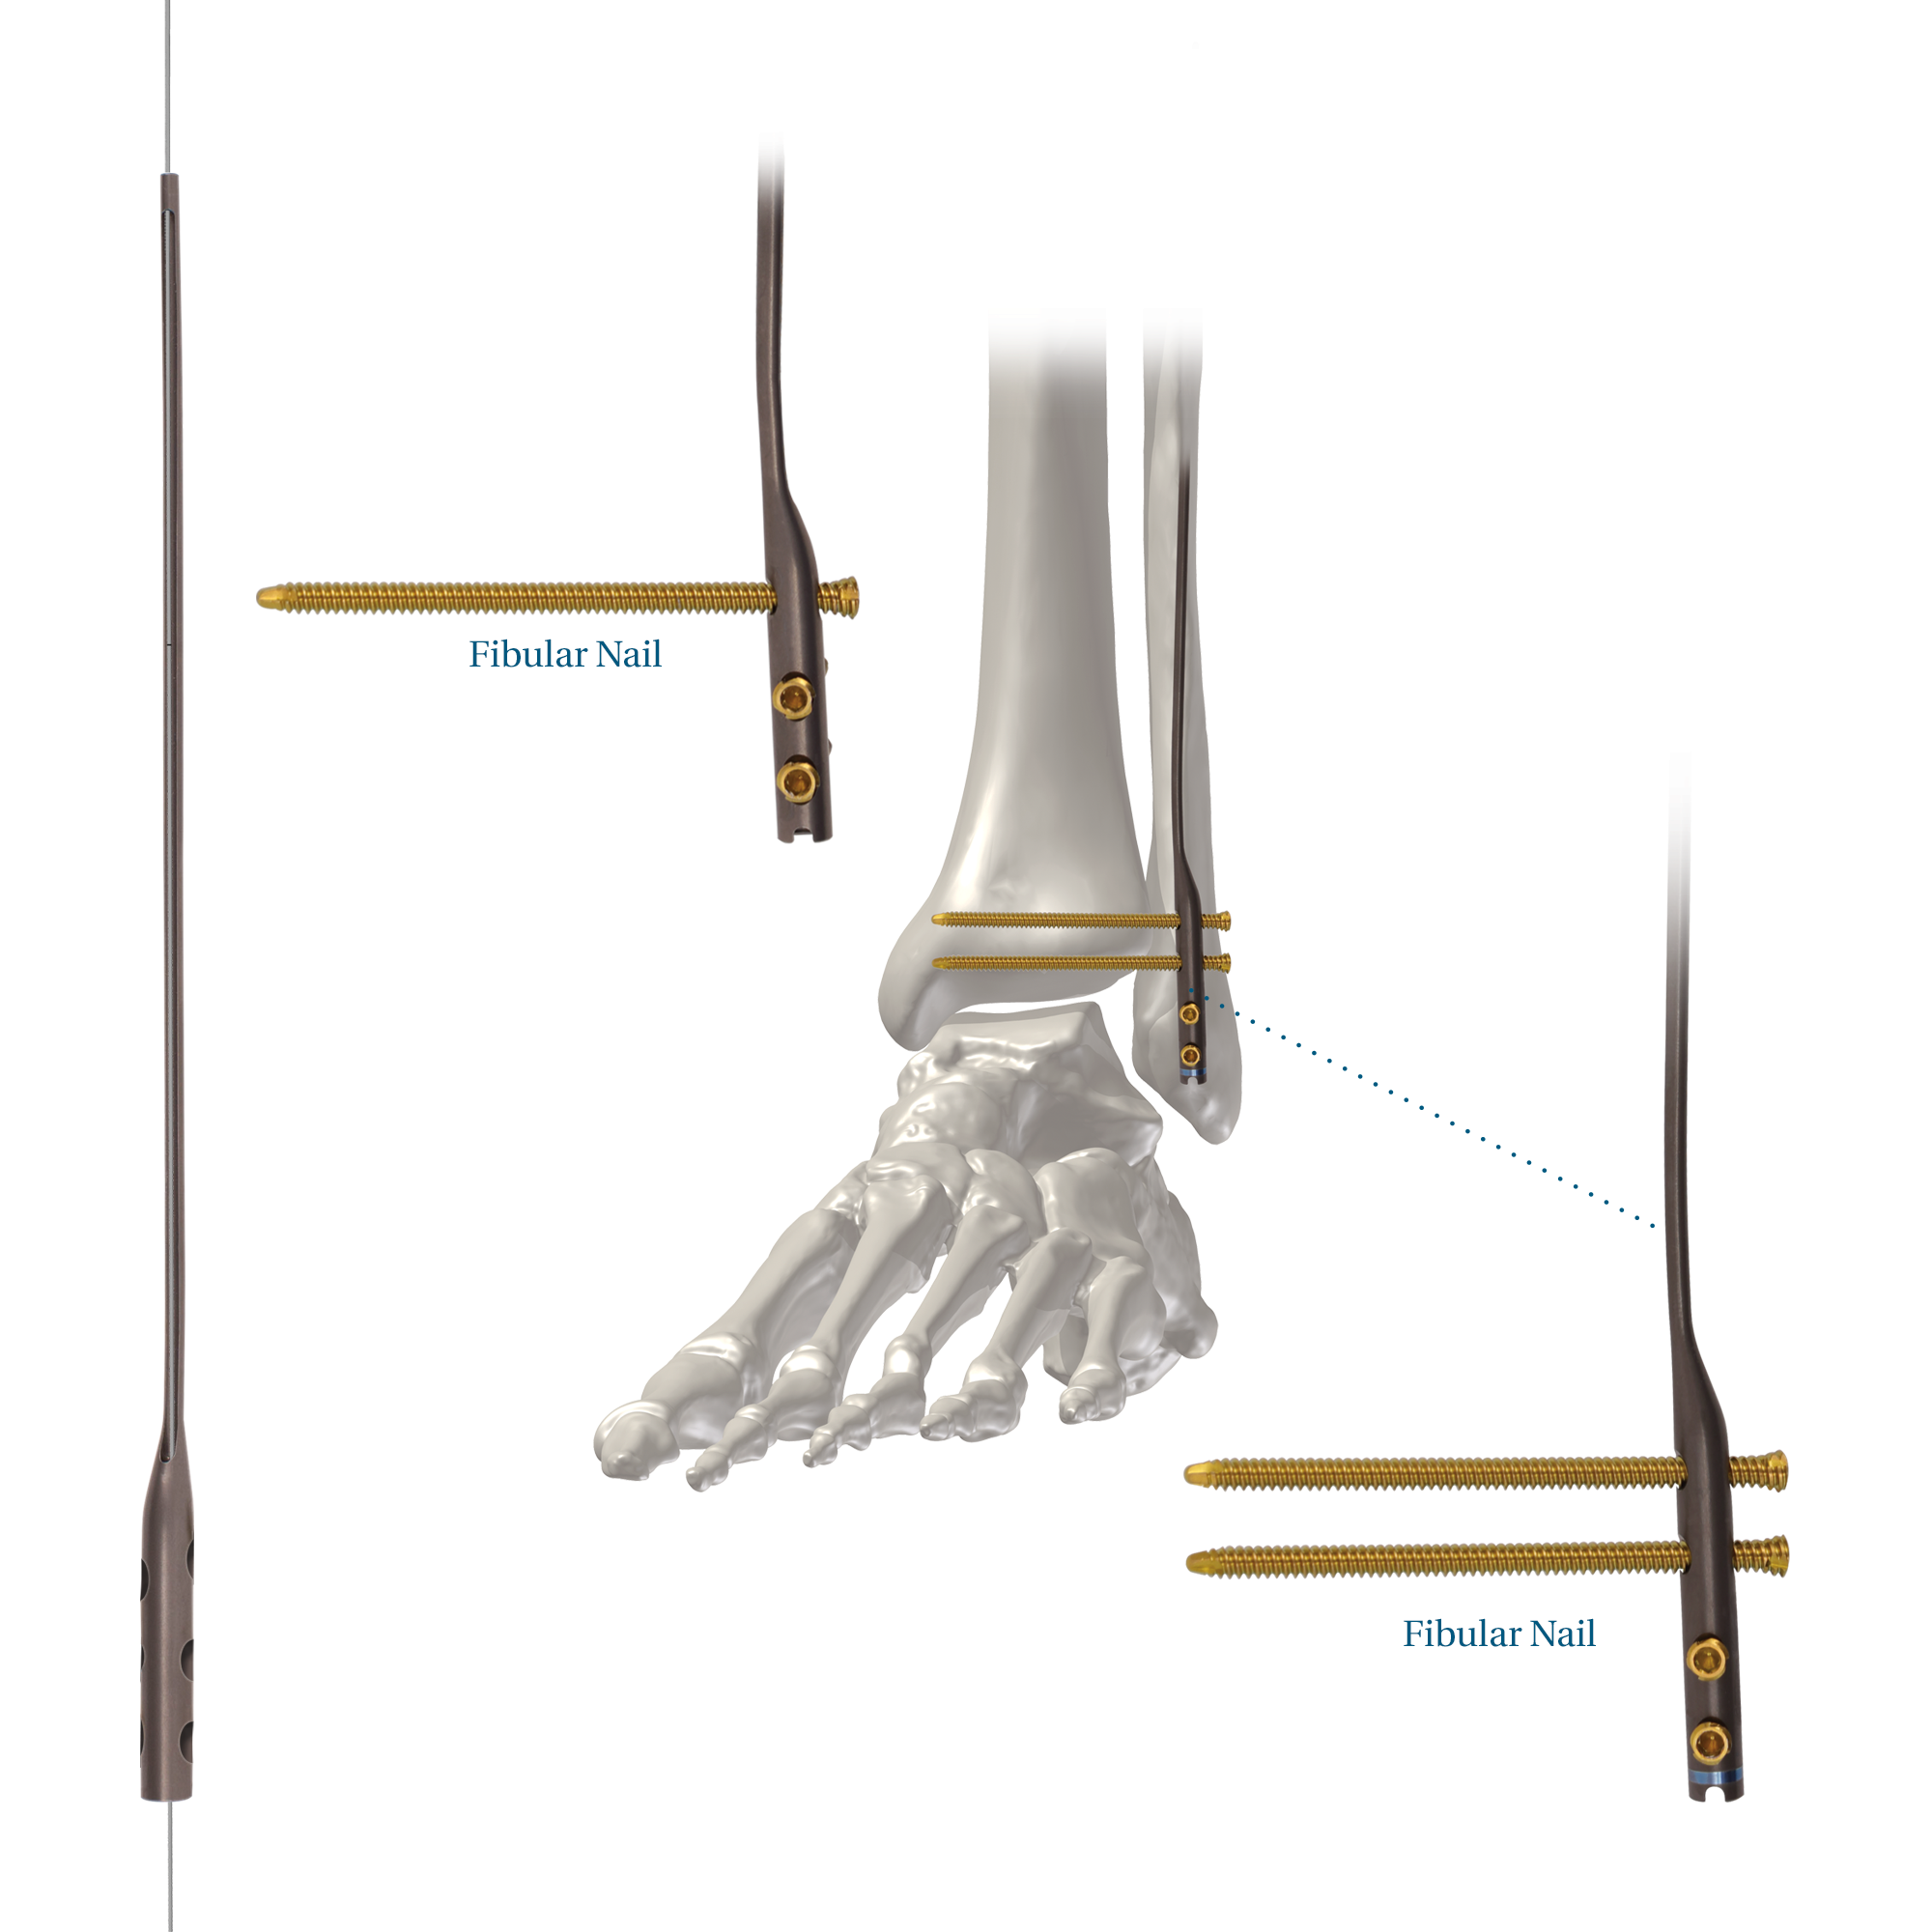 Titanium Cannulated Tibial Nail-EX | DePuy Synthes | J&J MedTech US